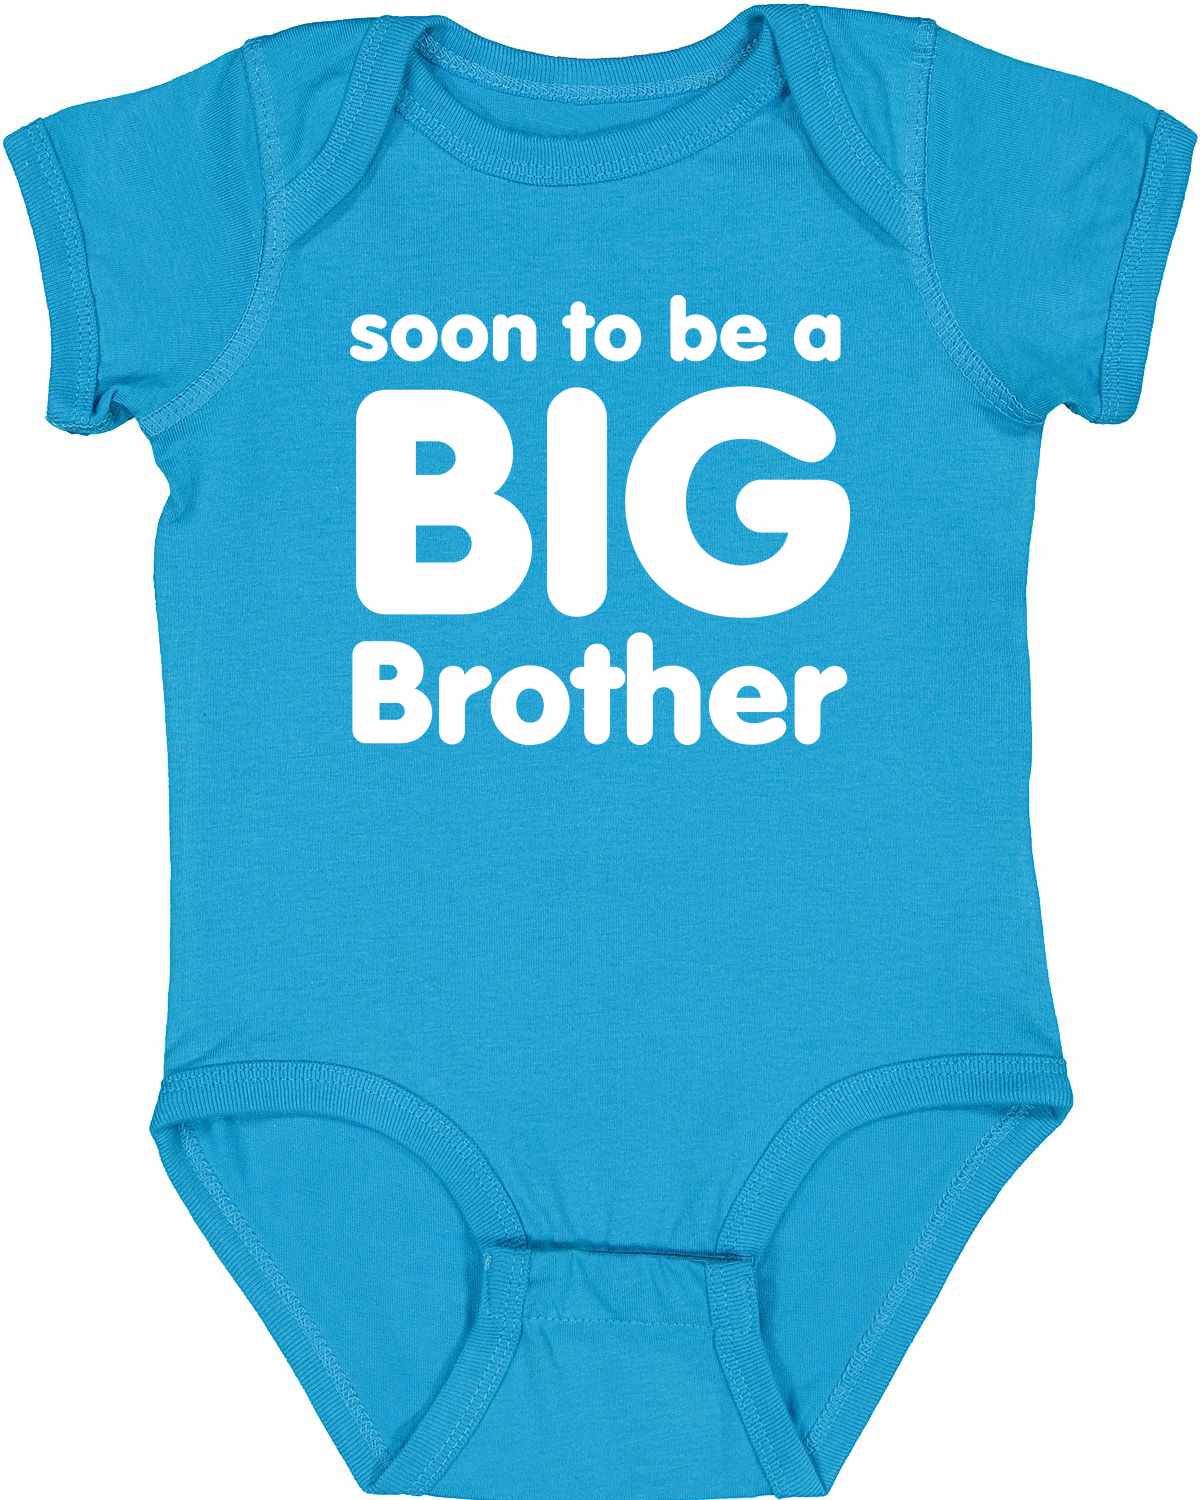 Soon to be a BIG BROTHER Infant BodySuit